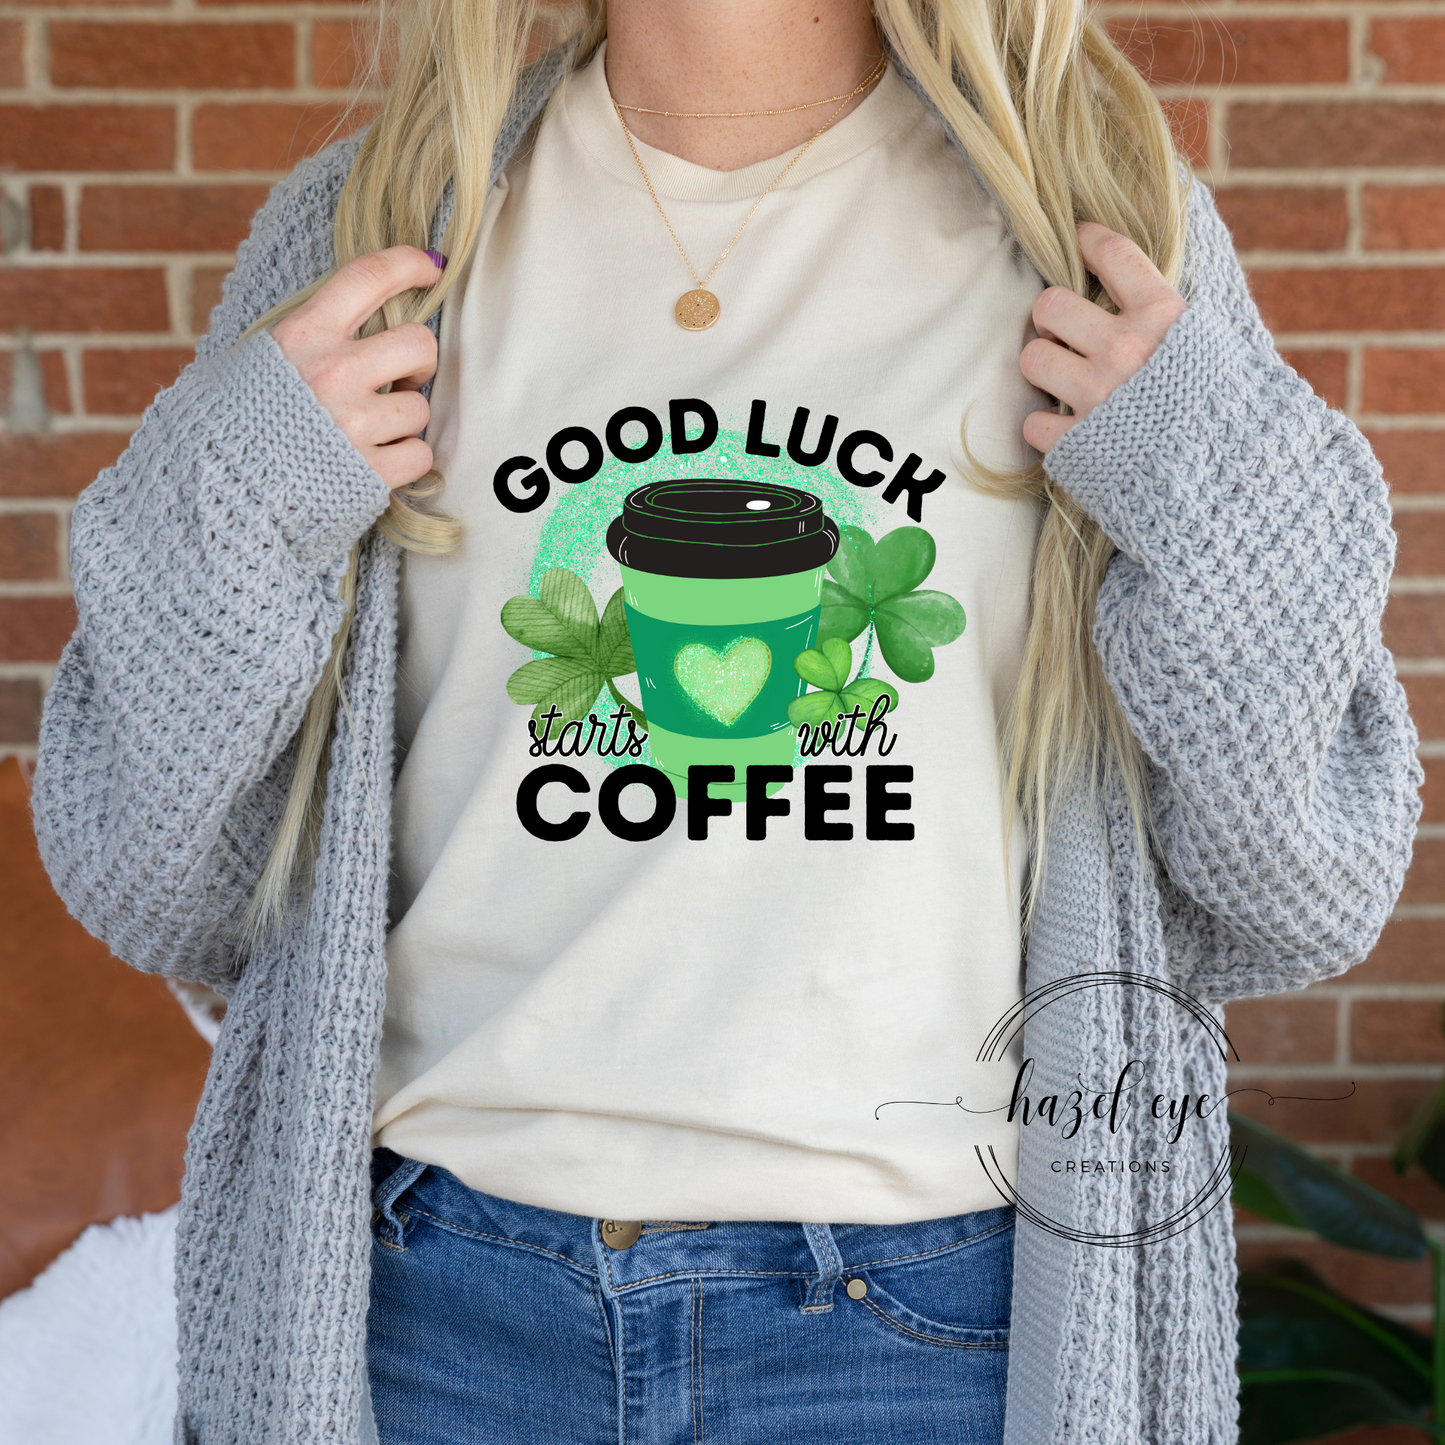 Good luck starts with coffee